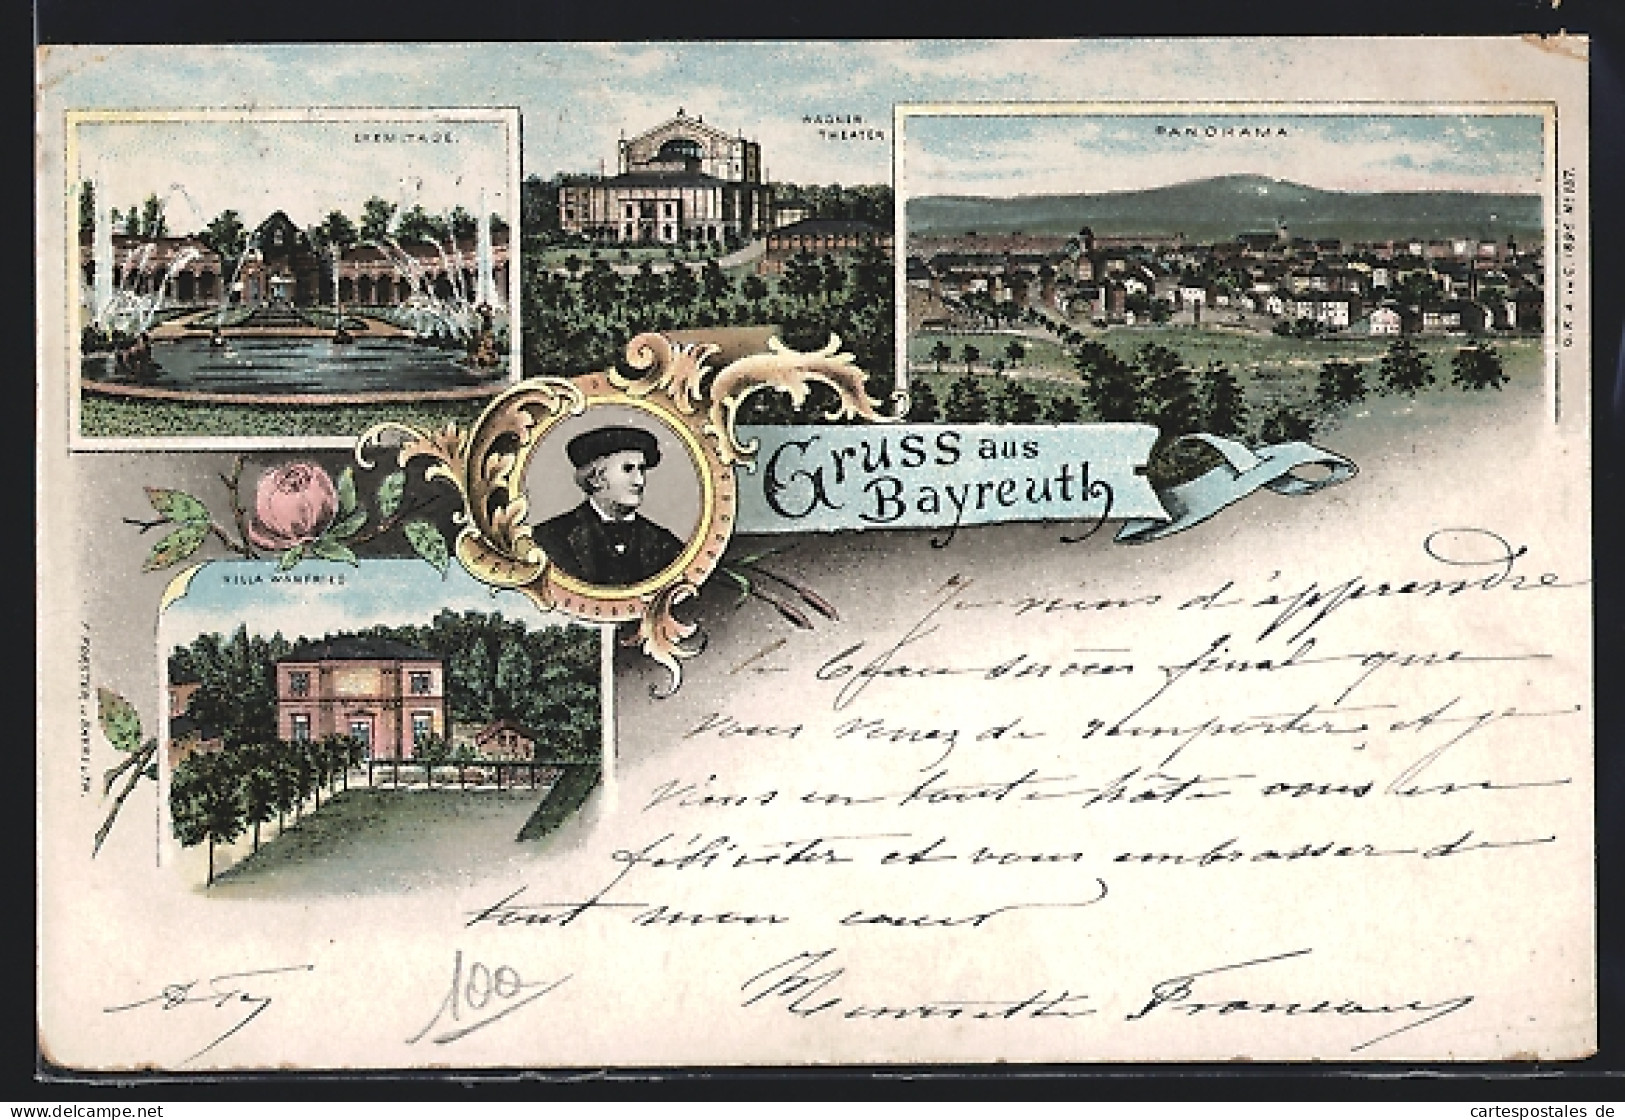 Lithographie Bayreuth, Wagner-Theater, Villa Wanfried, Eremitage, Panorama  - Théâtre